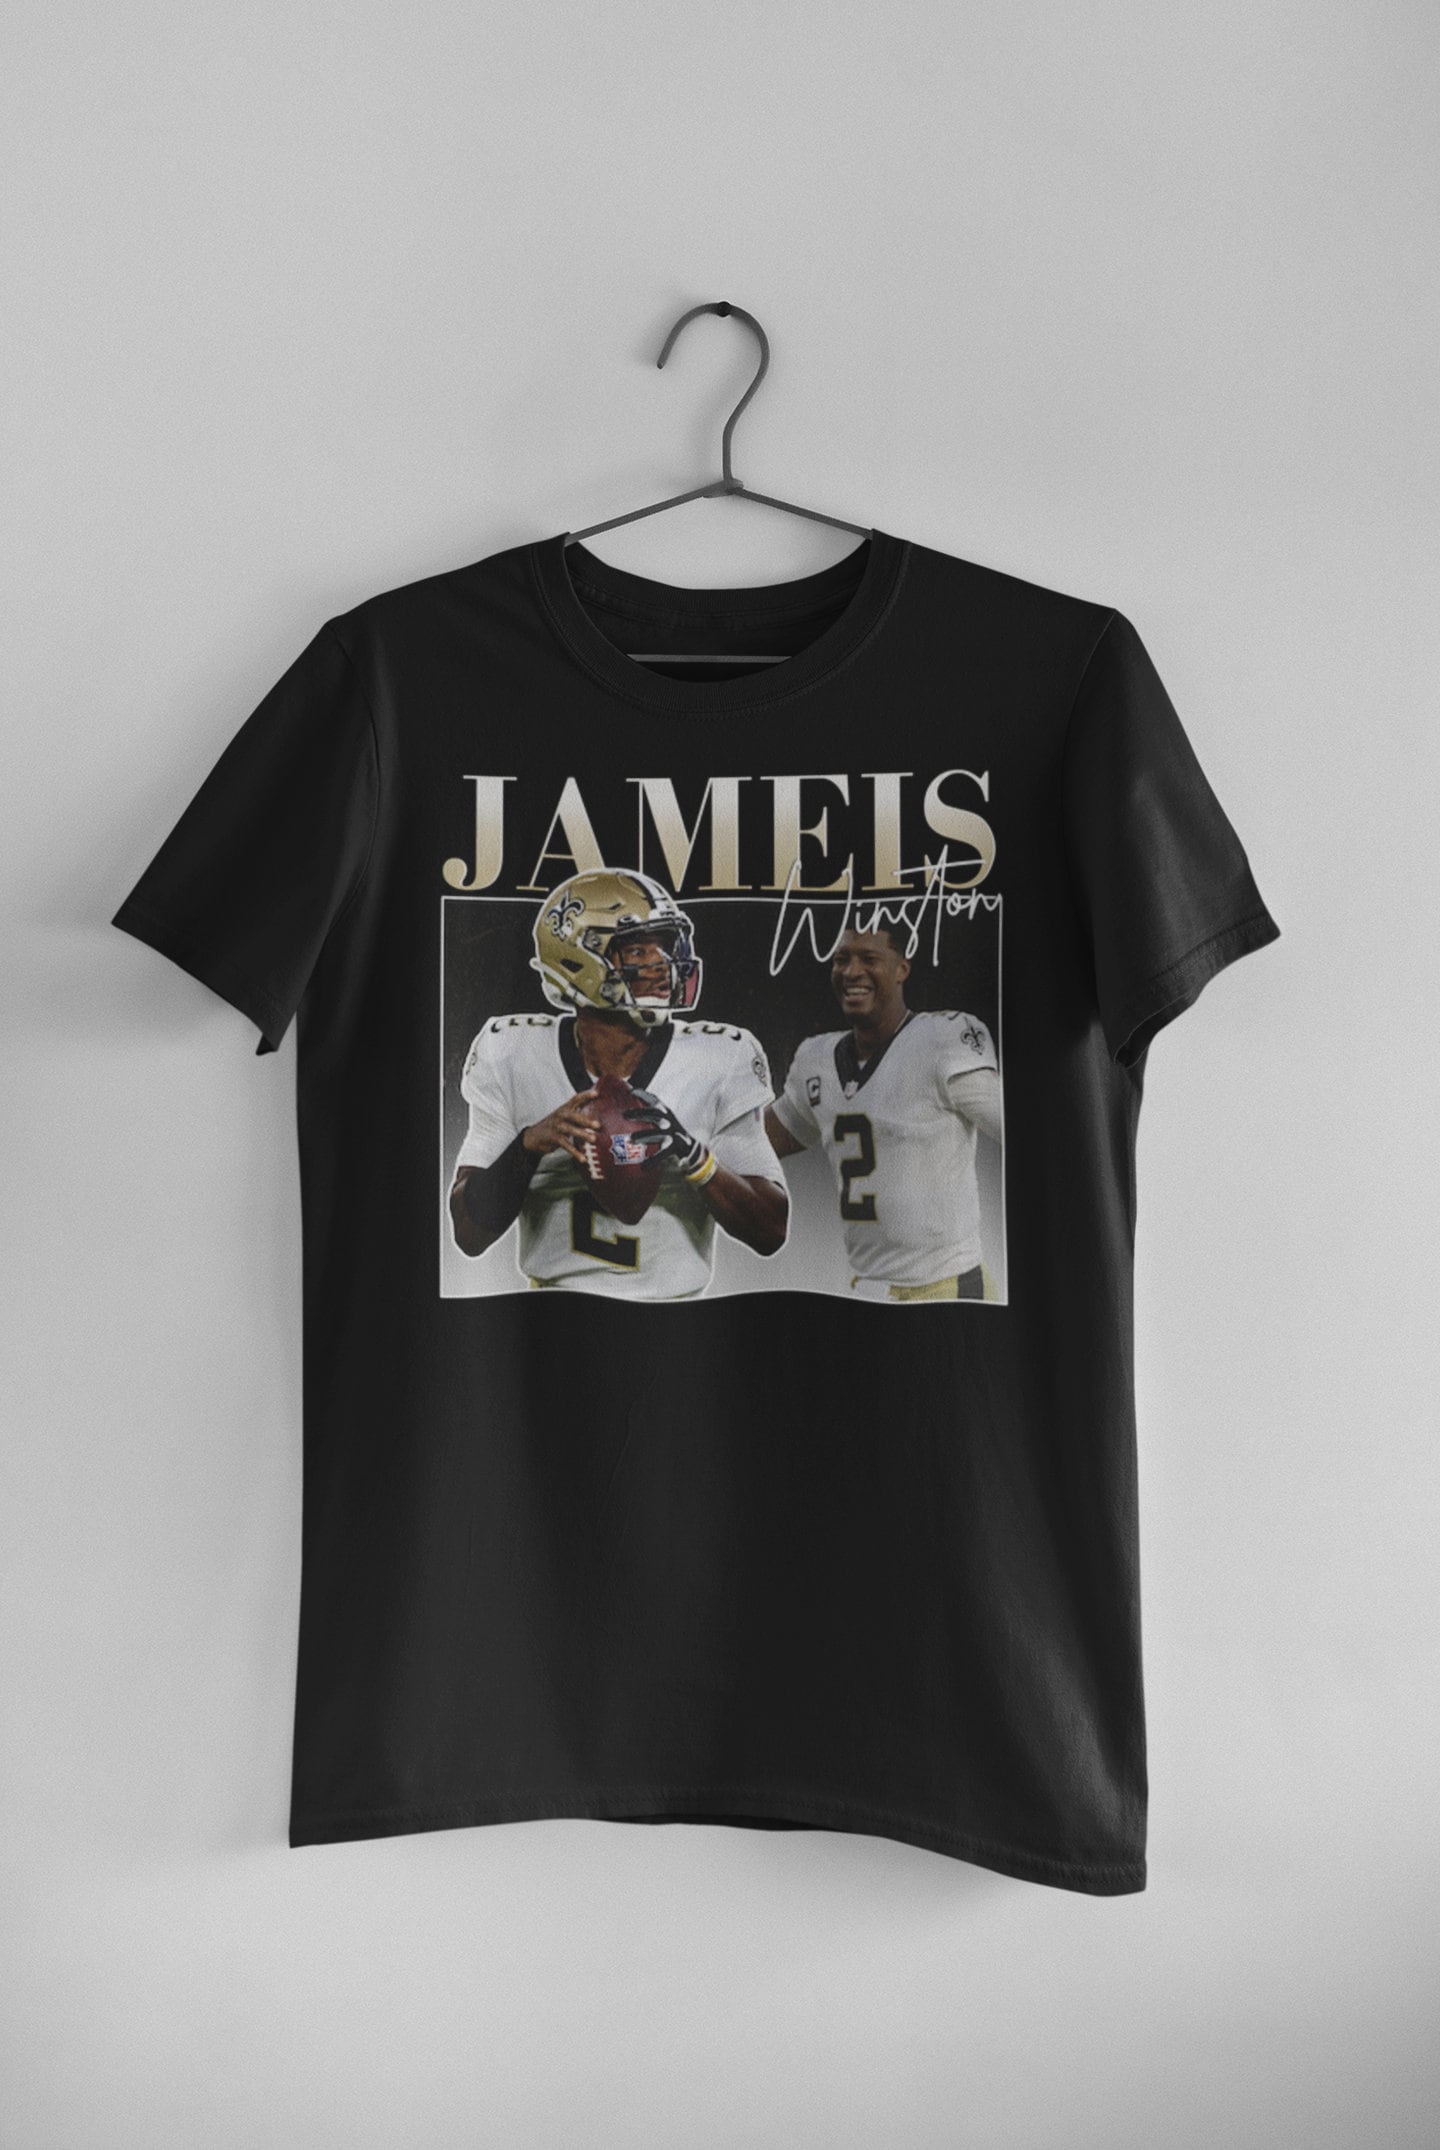 Discover JAMEIS WINSTON t shirt - New Orleans tshirt